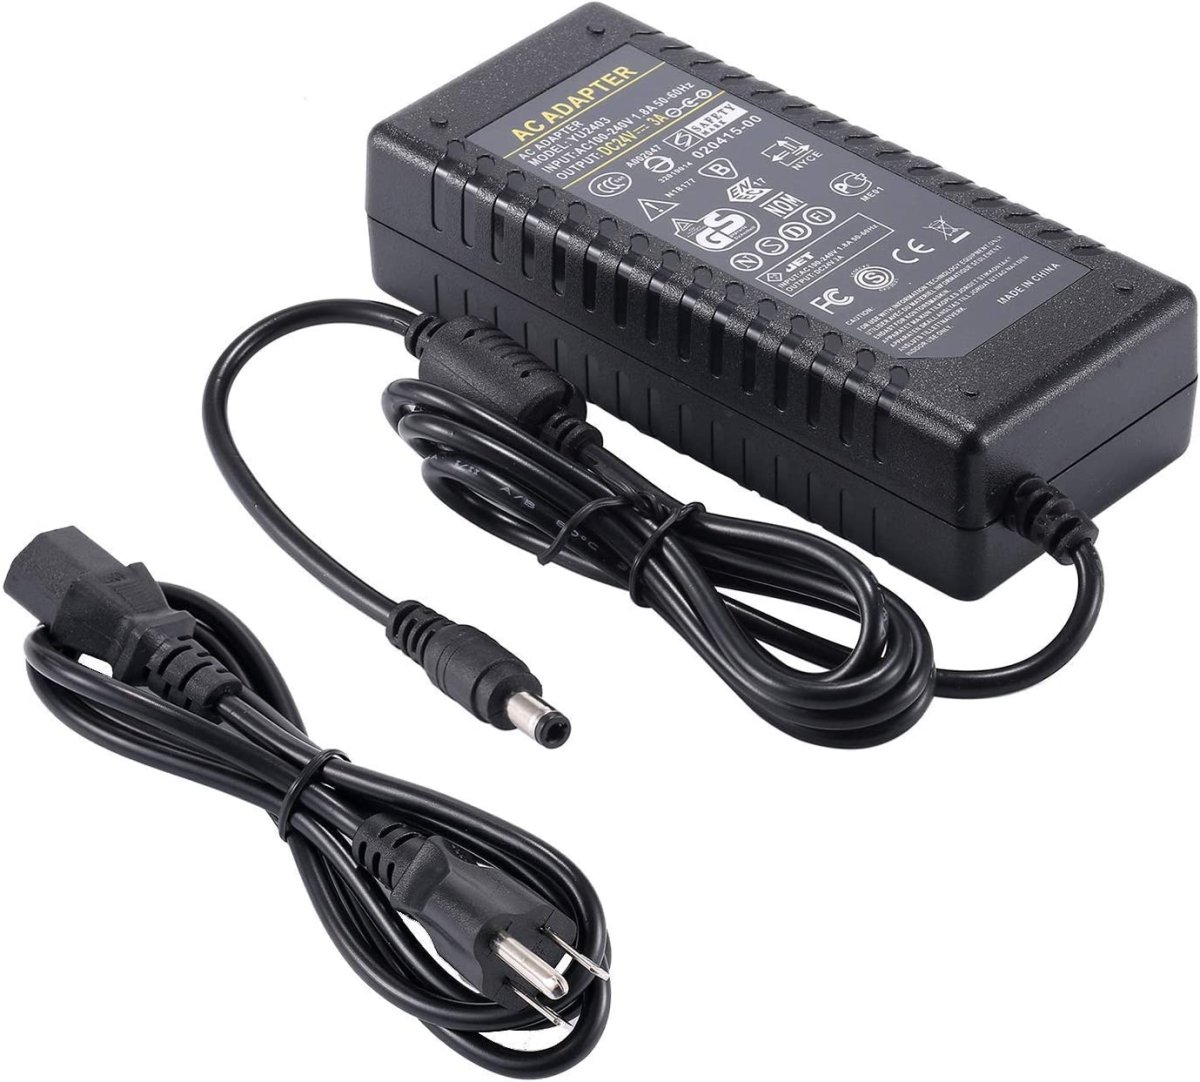 Amazon Power Supply for MPs.jpg